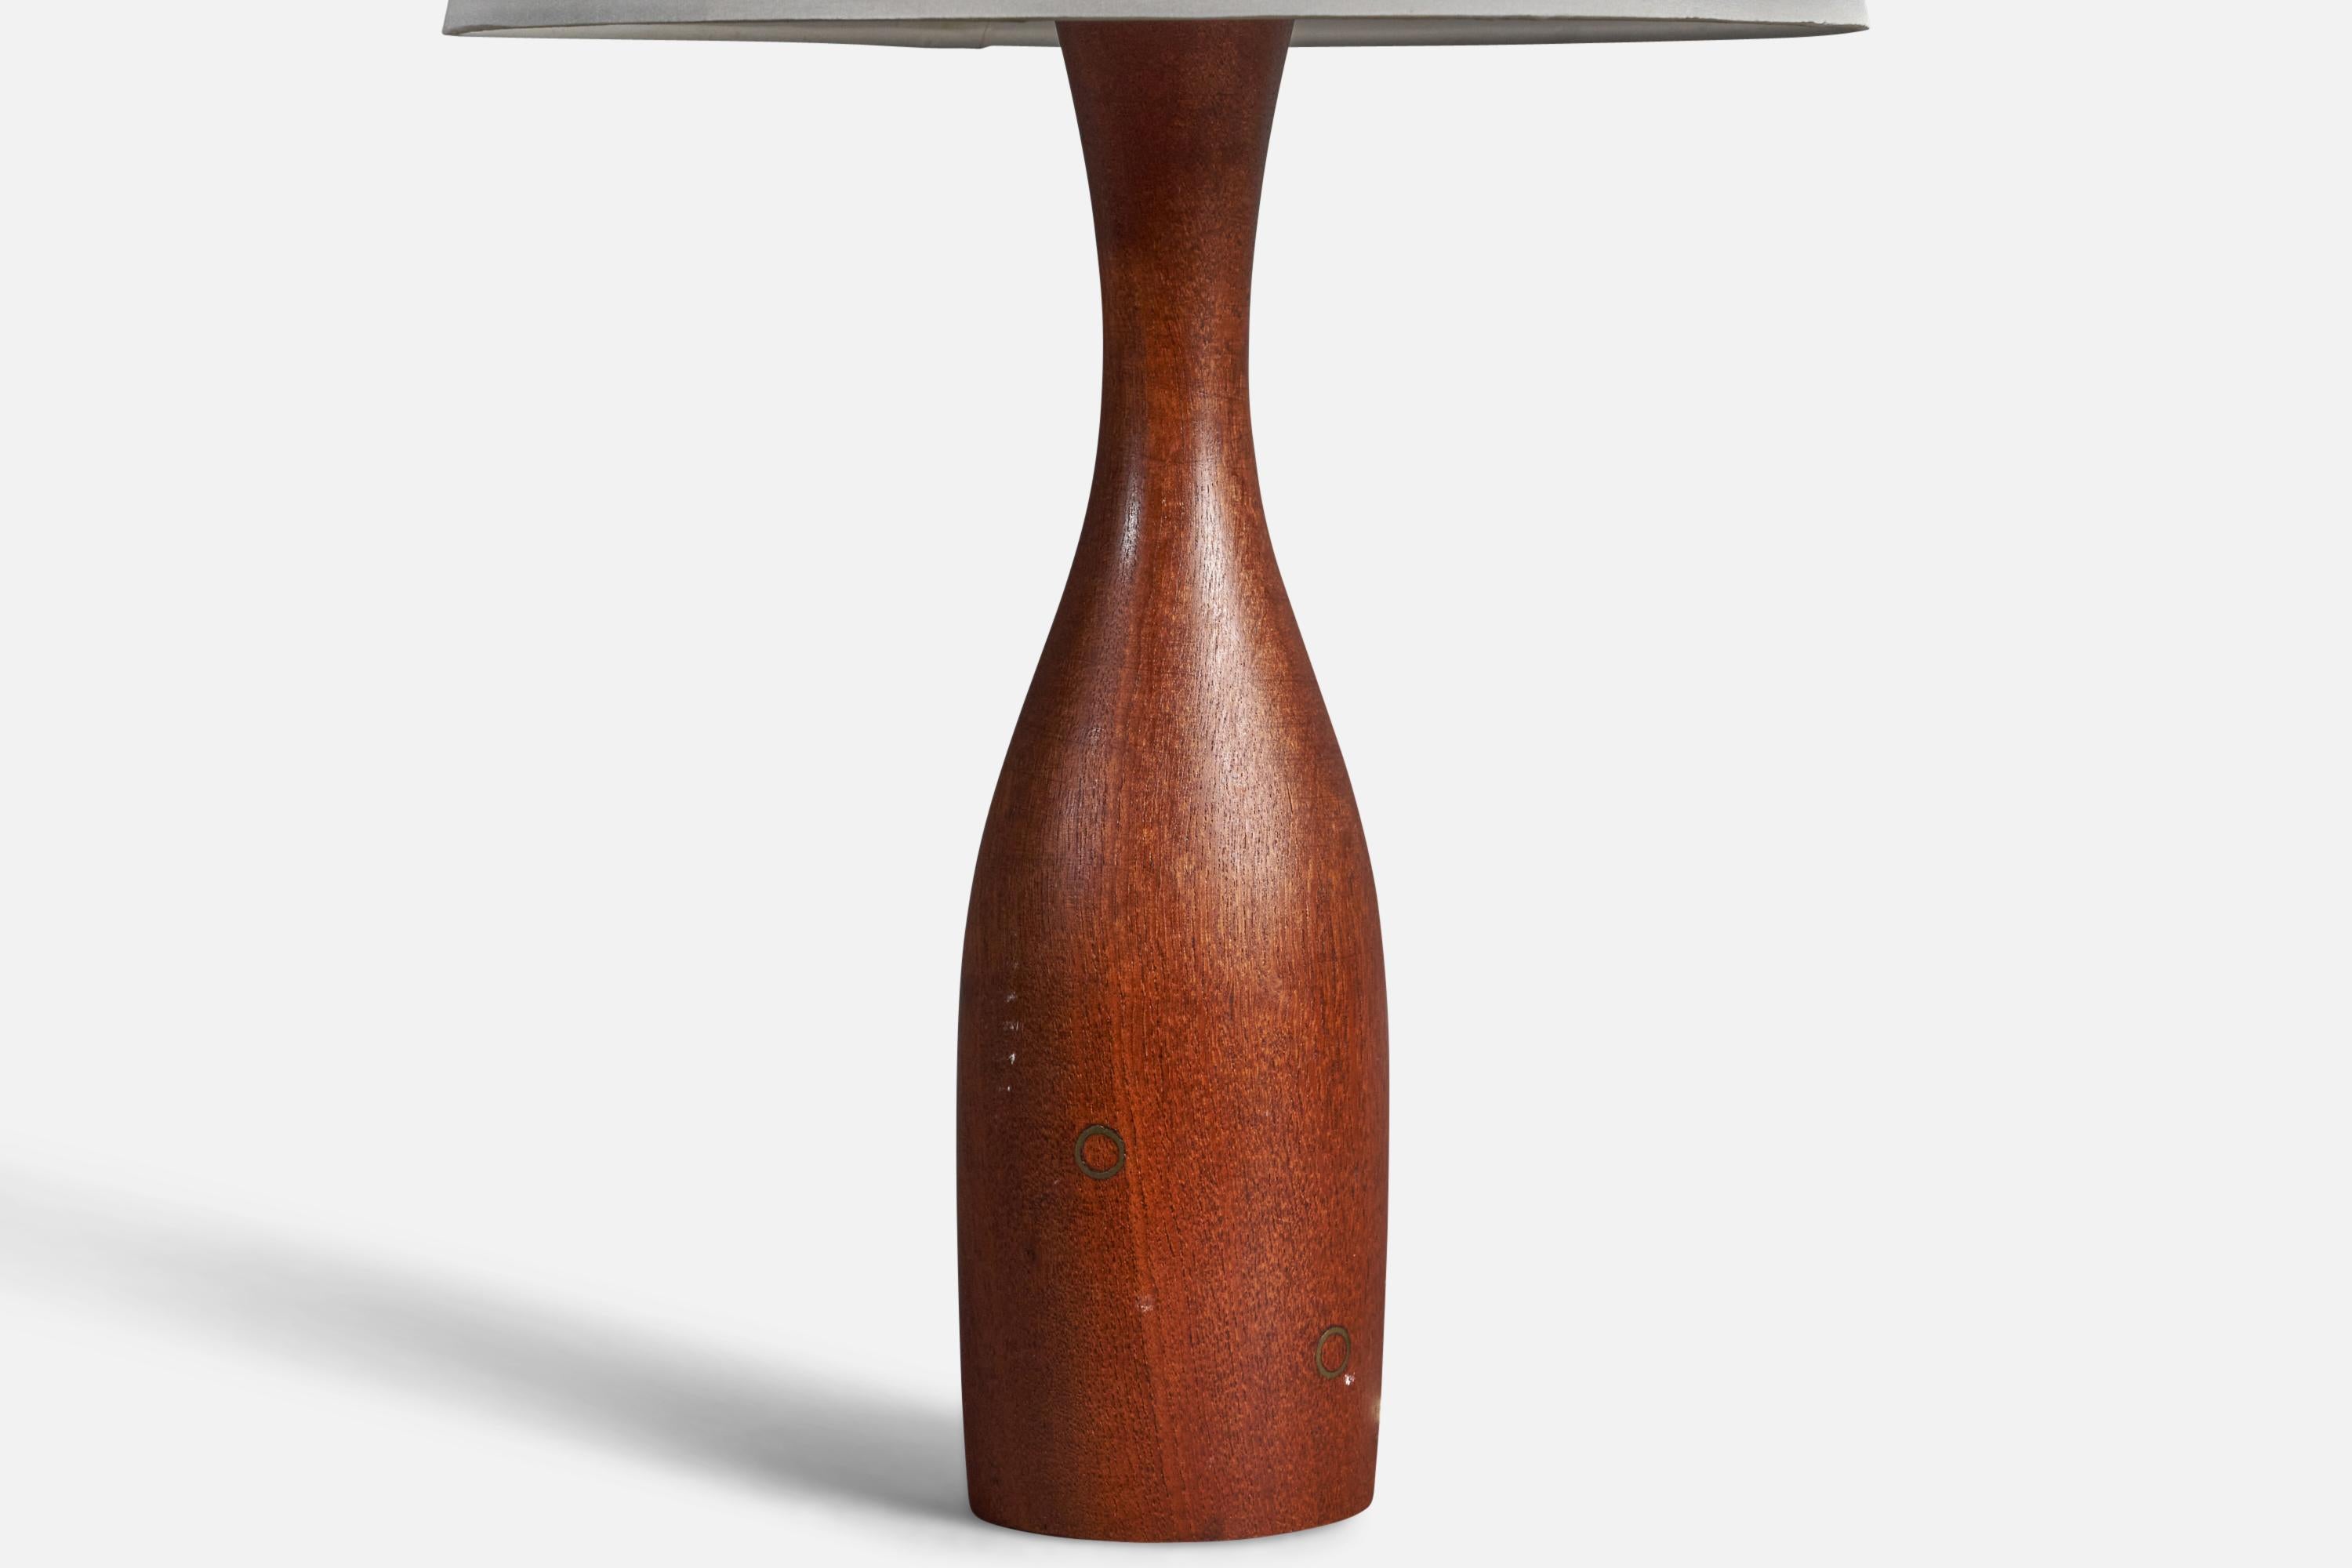 Danish Modernist Designer, Organic Table Lamp, Teak, Brass Inlays, Denmark 1950s In Good Condition For Sale In High Point, NC